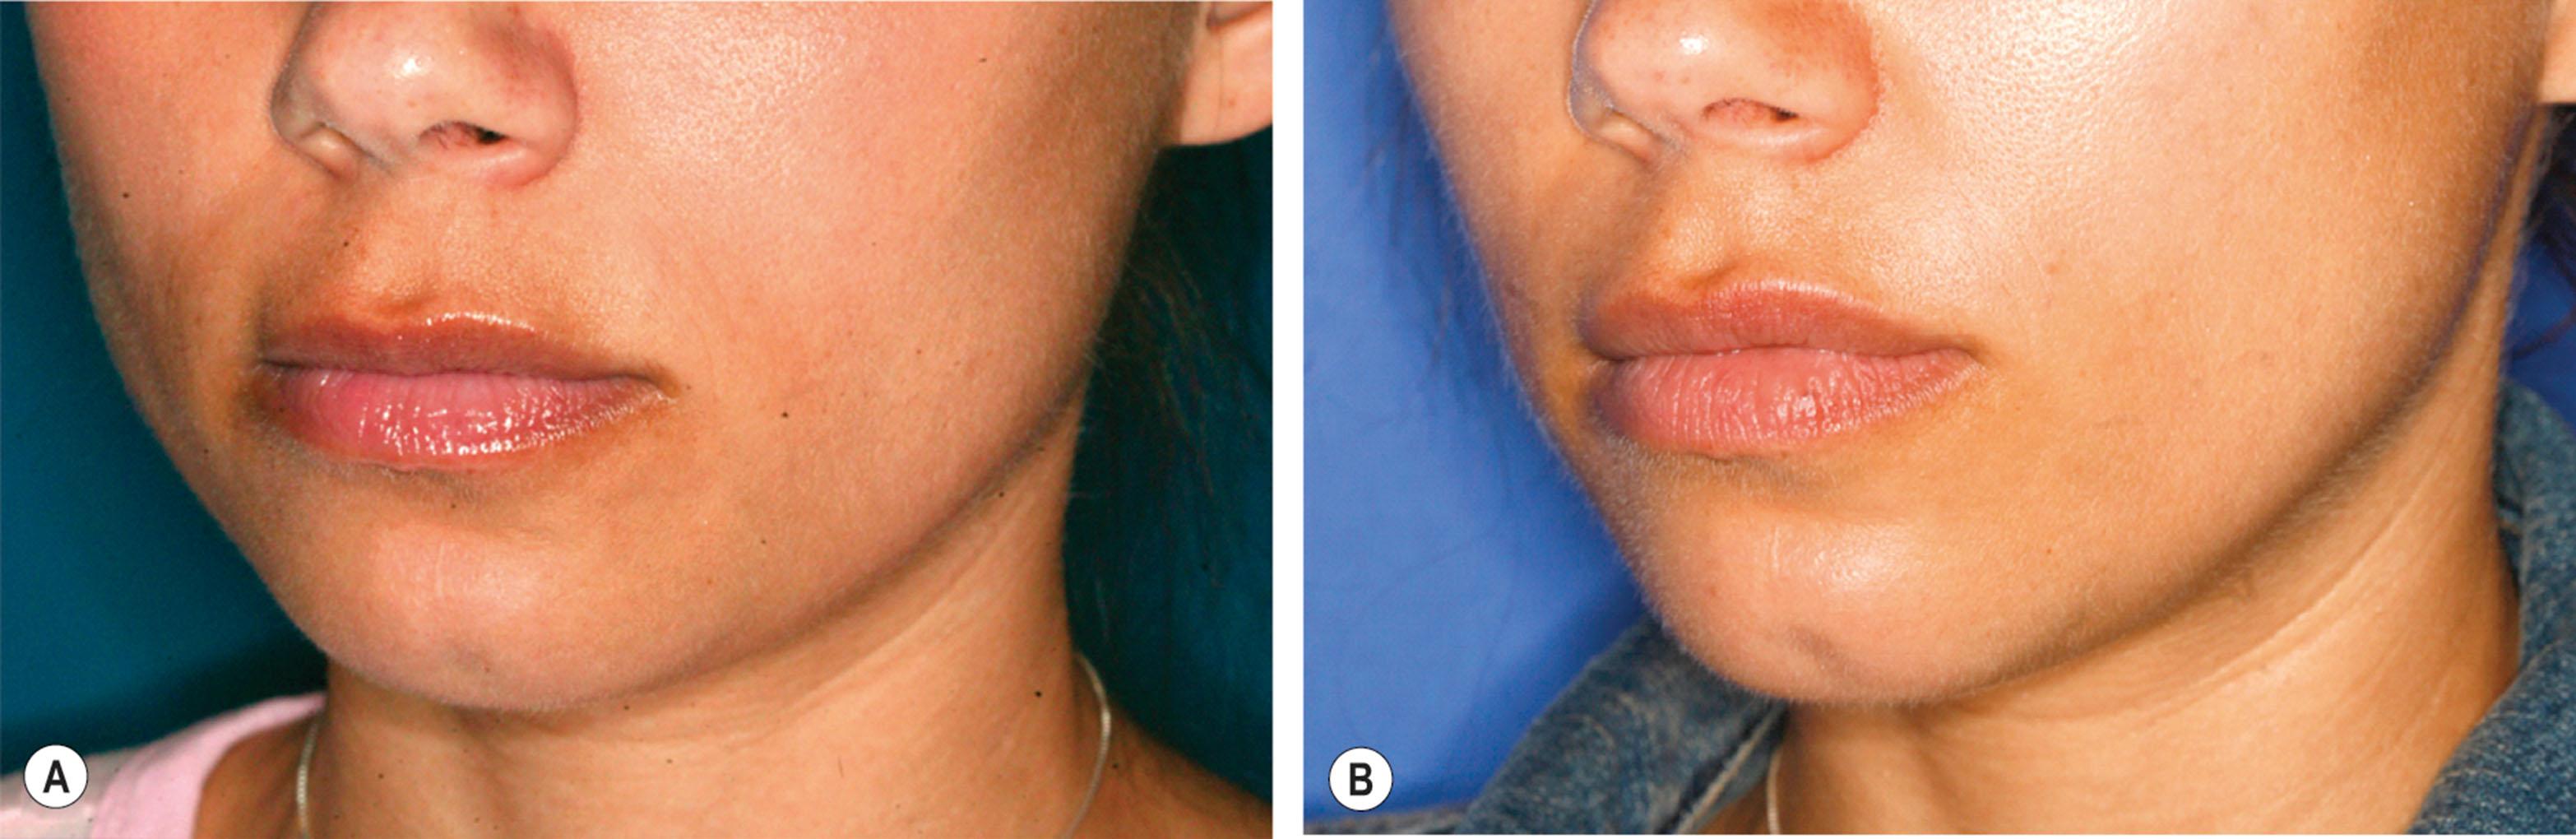 Figure 16.3, (A,B) This young woman presented for improved balance of her lower face; 5 cc of fat was placed into her anterior and inferior chin to elongate it. Note that the natural dimple was preserved.